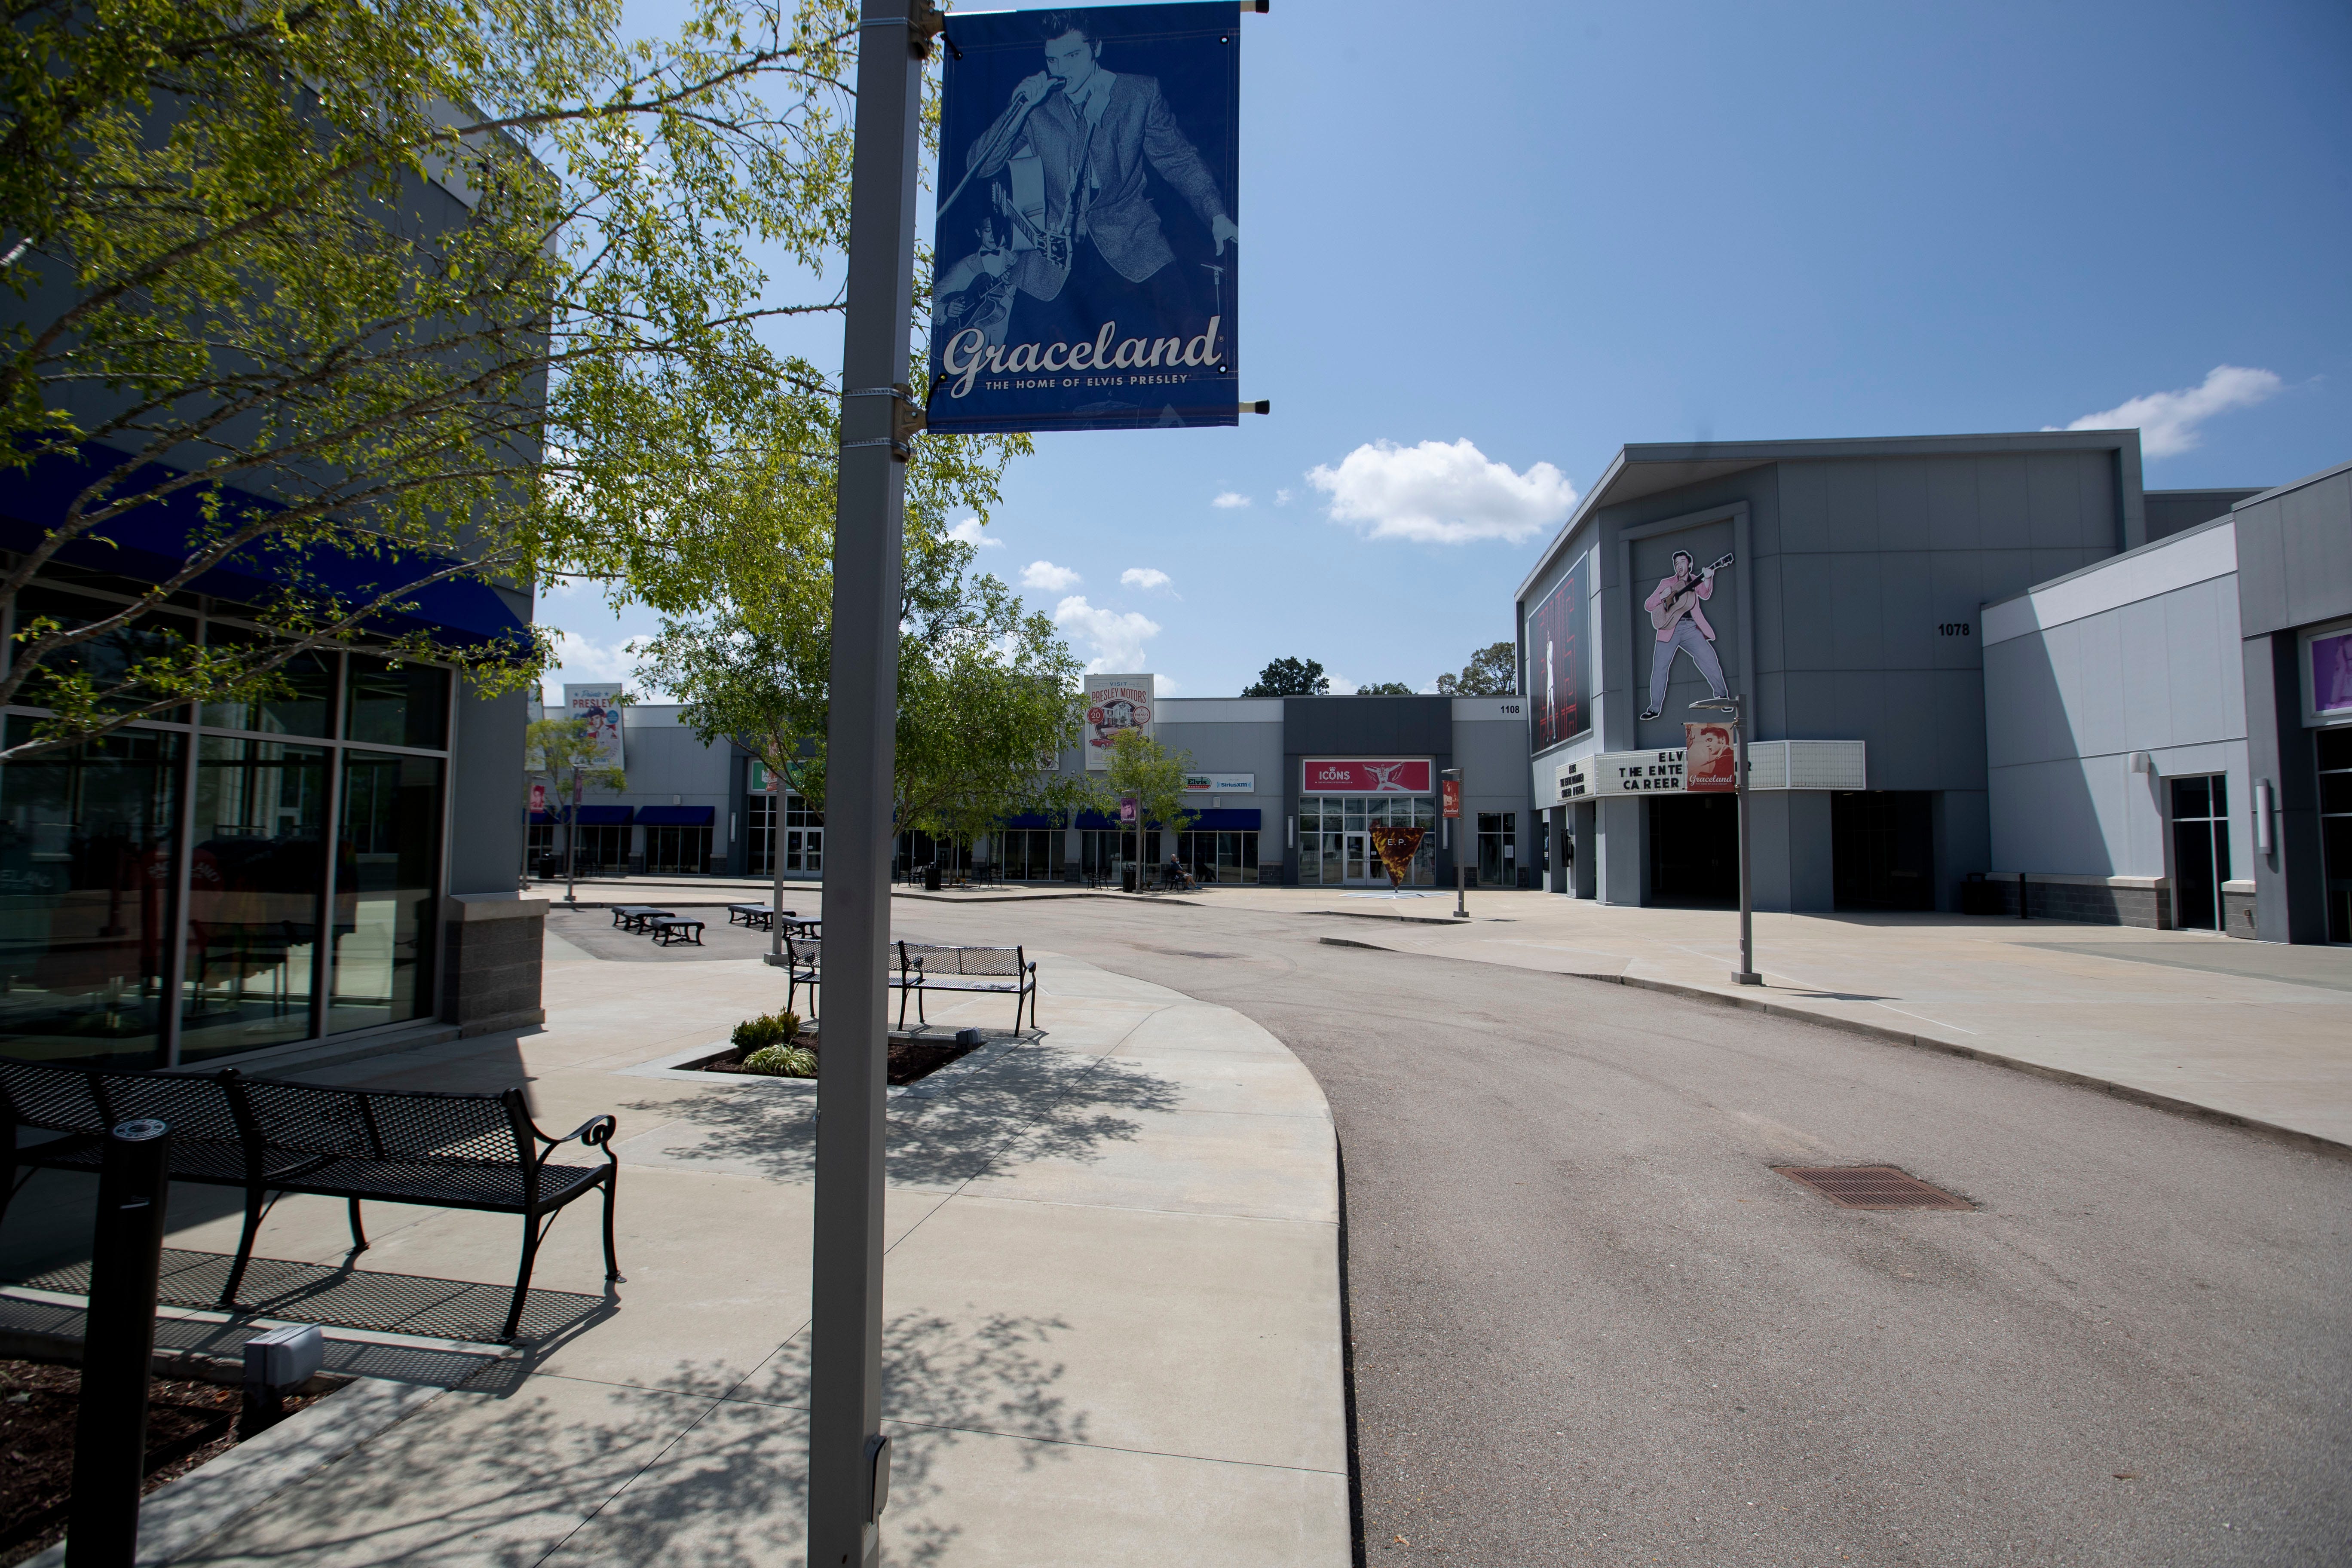 Elvis Presley’s Memphis, pictured on Aug. 11, 2020, opened in 2017 and features restaurants, shops and museums located across the street from Graceland.